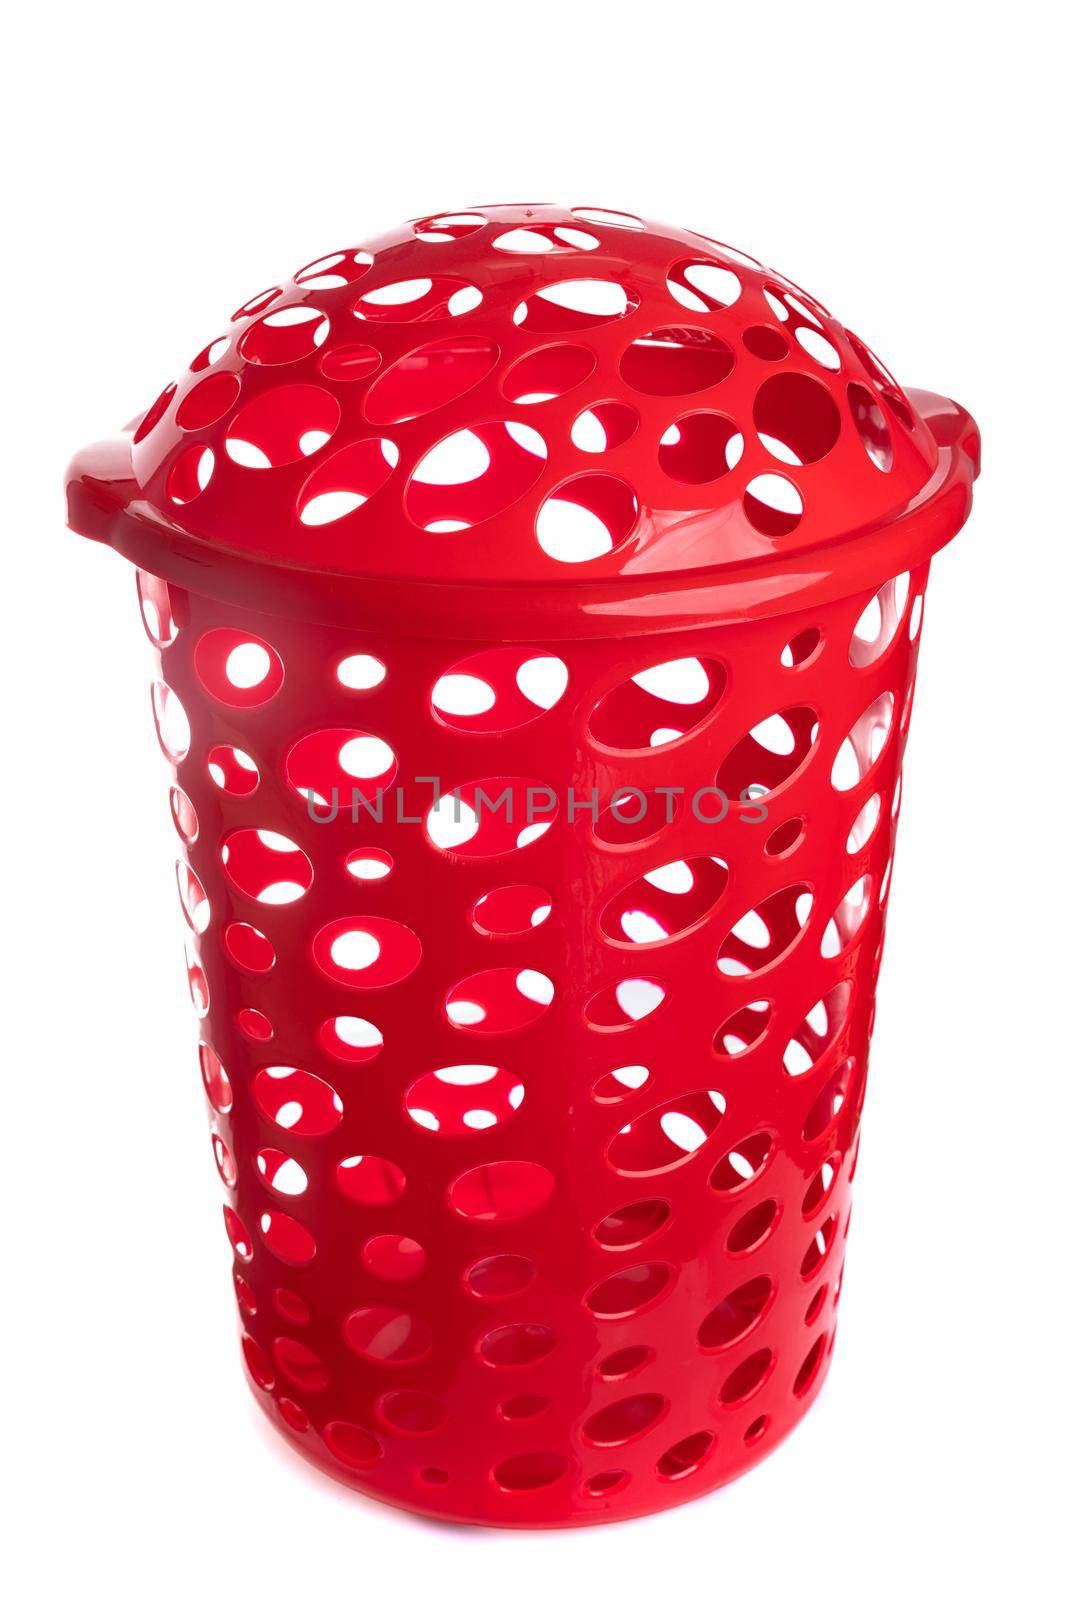 red plastic laundry tub on white background